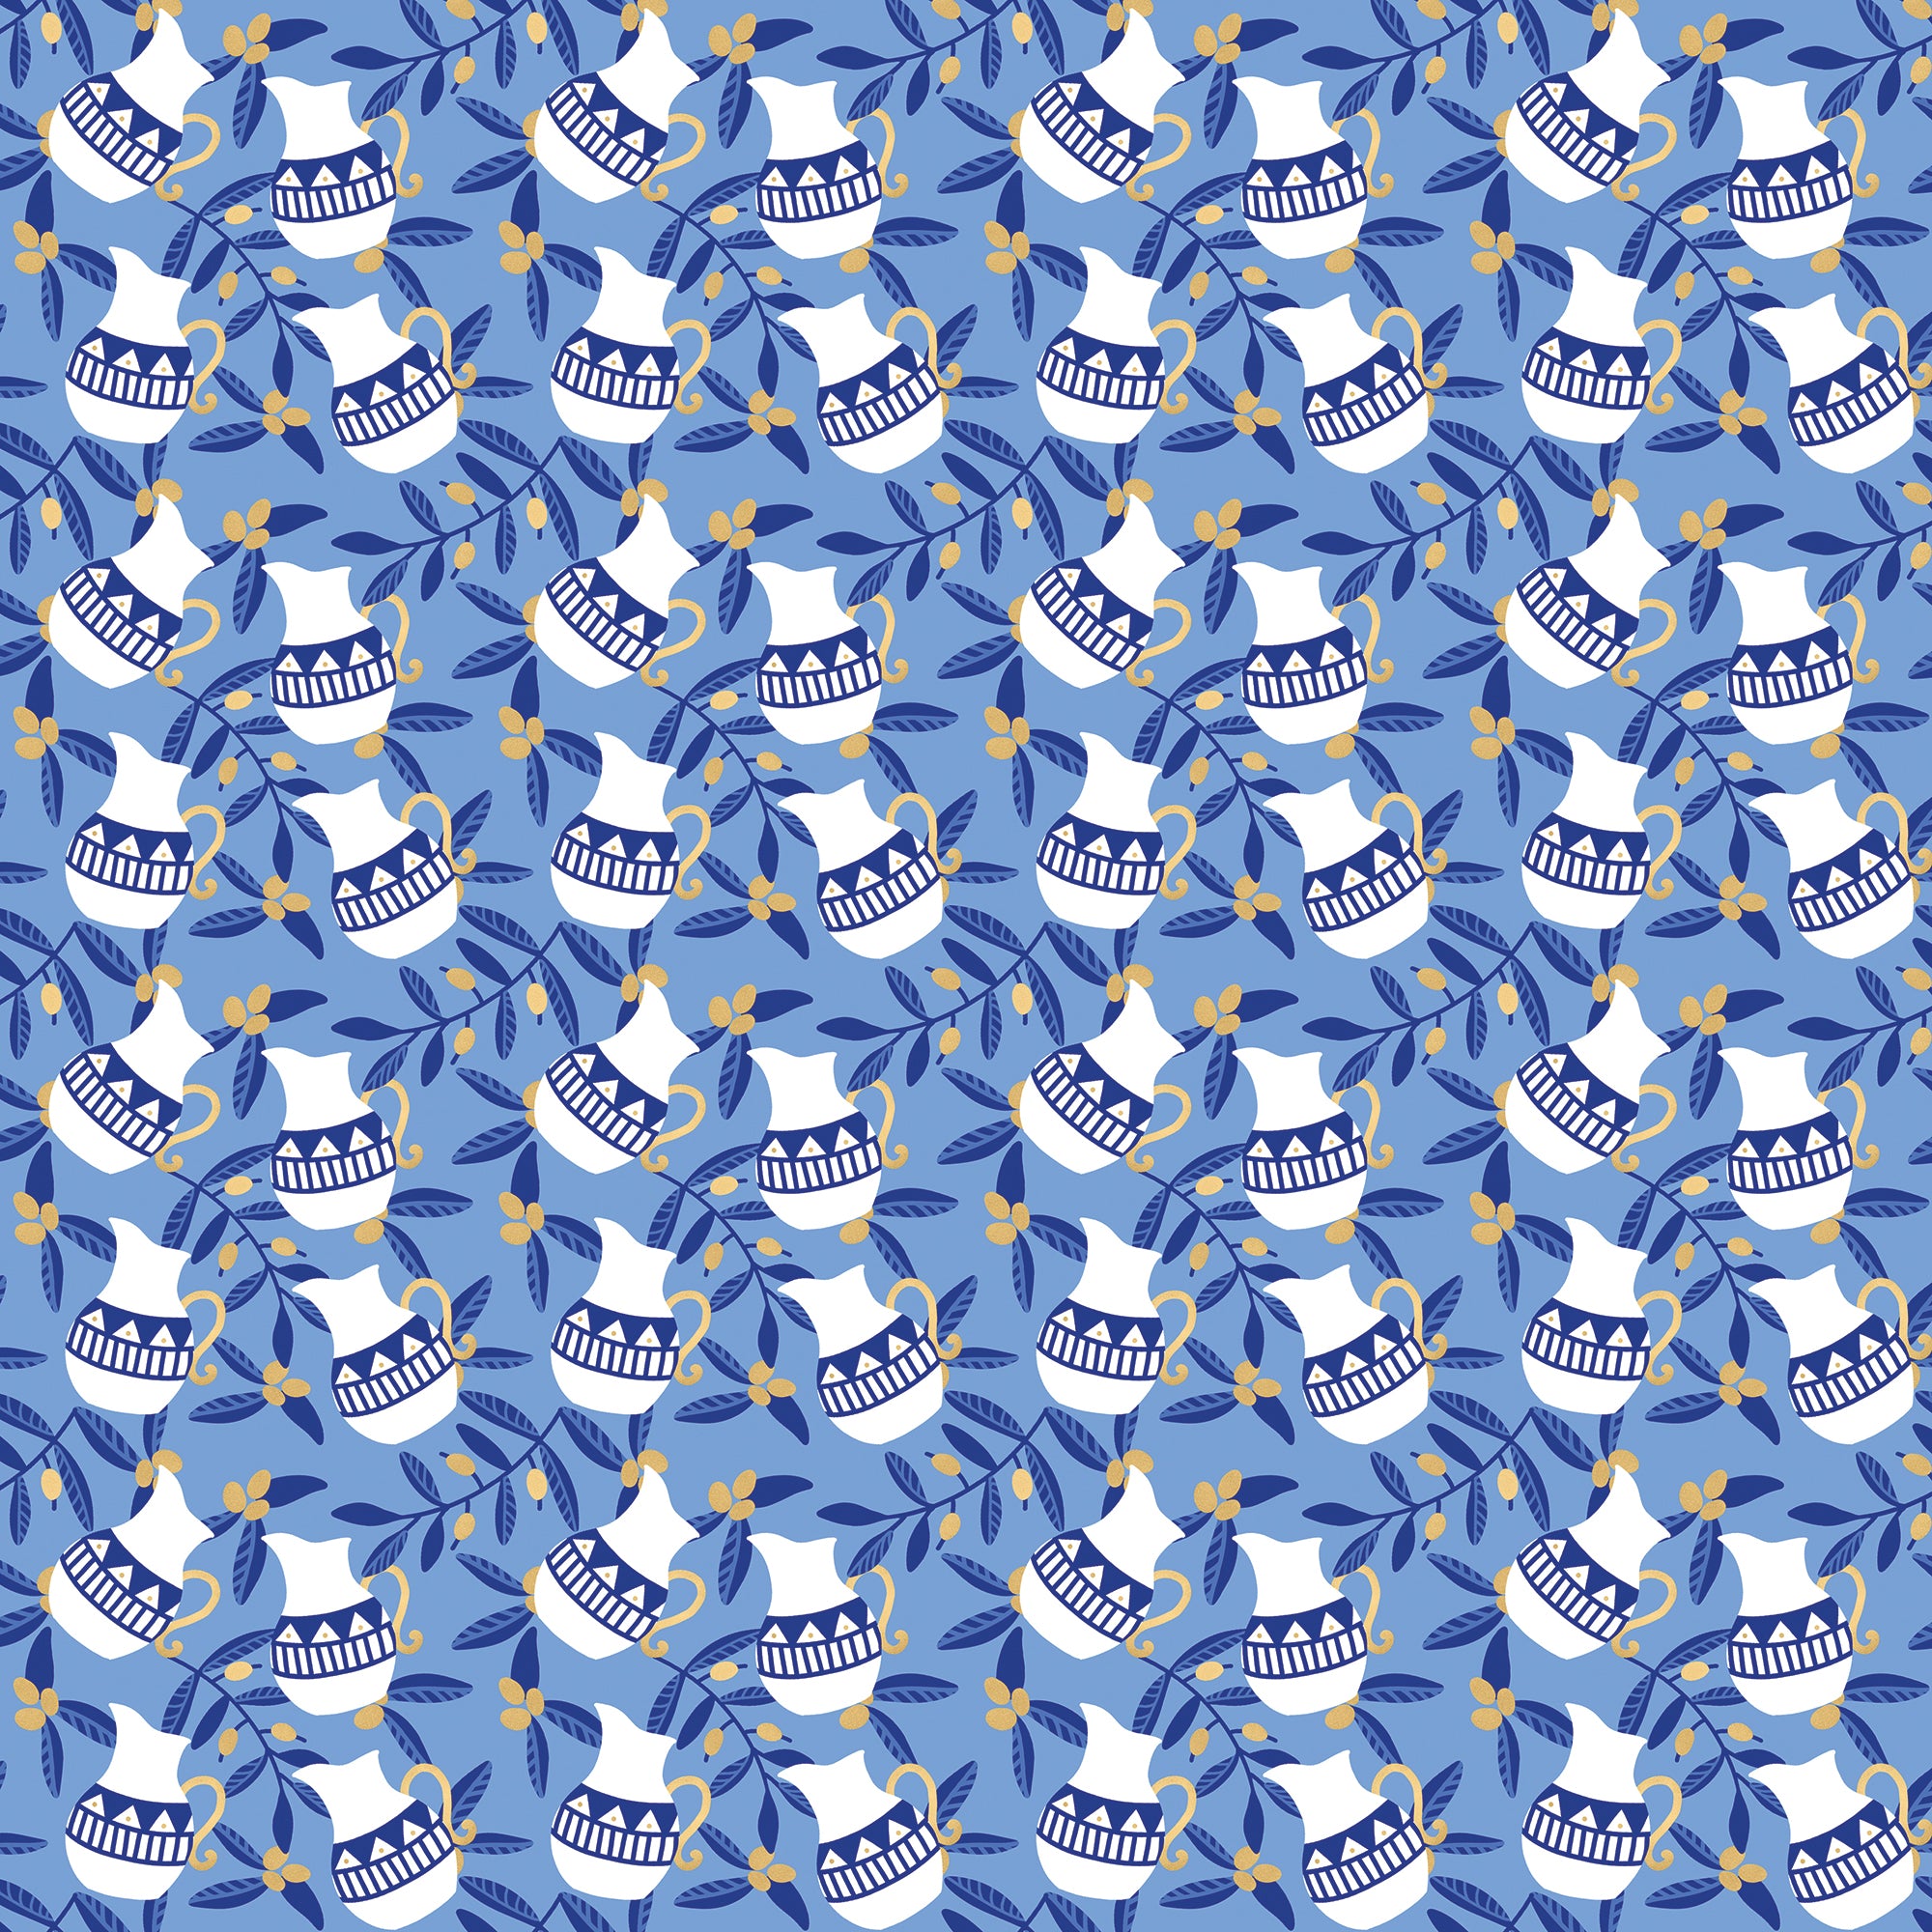 Hanukkah Vessels Wrapping Paper  Zero Waste Blue Wrapping Paper -  Waterleaf Paper Company